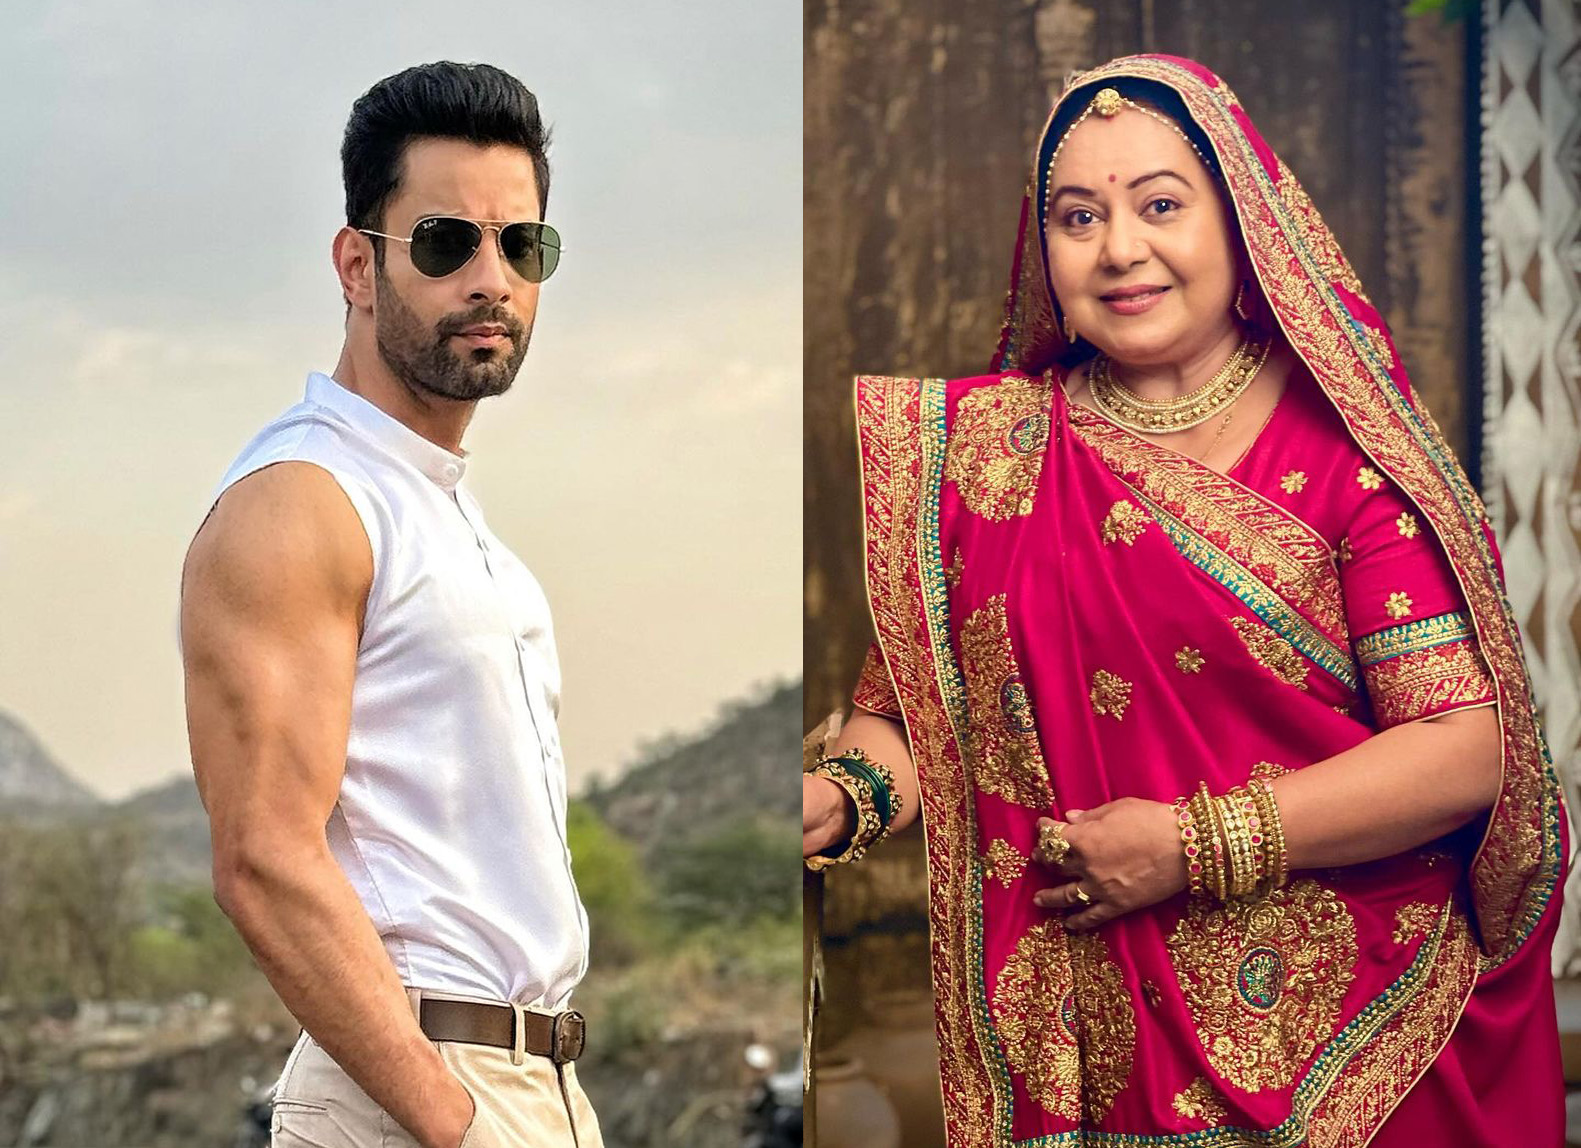 Veteran Actress Neelu Vaghela Commends Co-Star Sahil Uppal’s Ideal Qualities On And Off-Screen. Find Out About It!